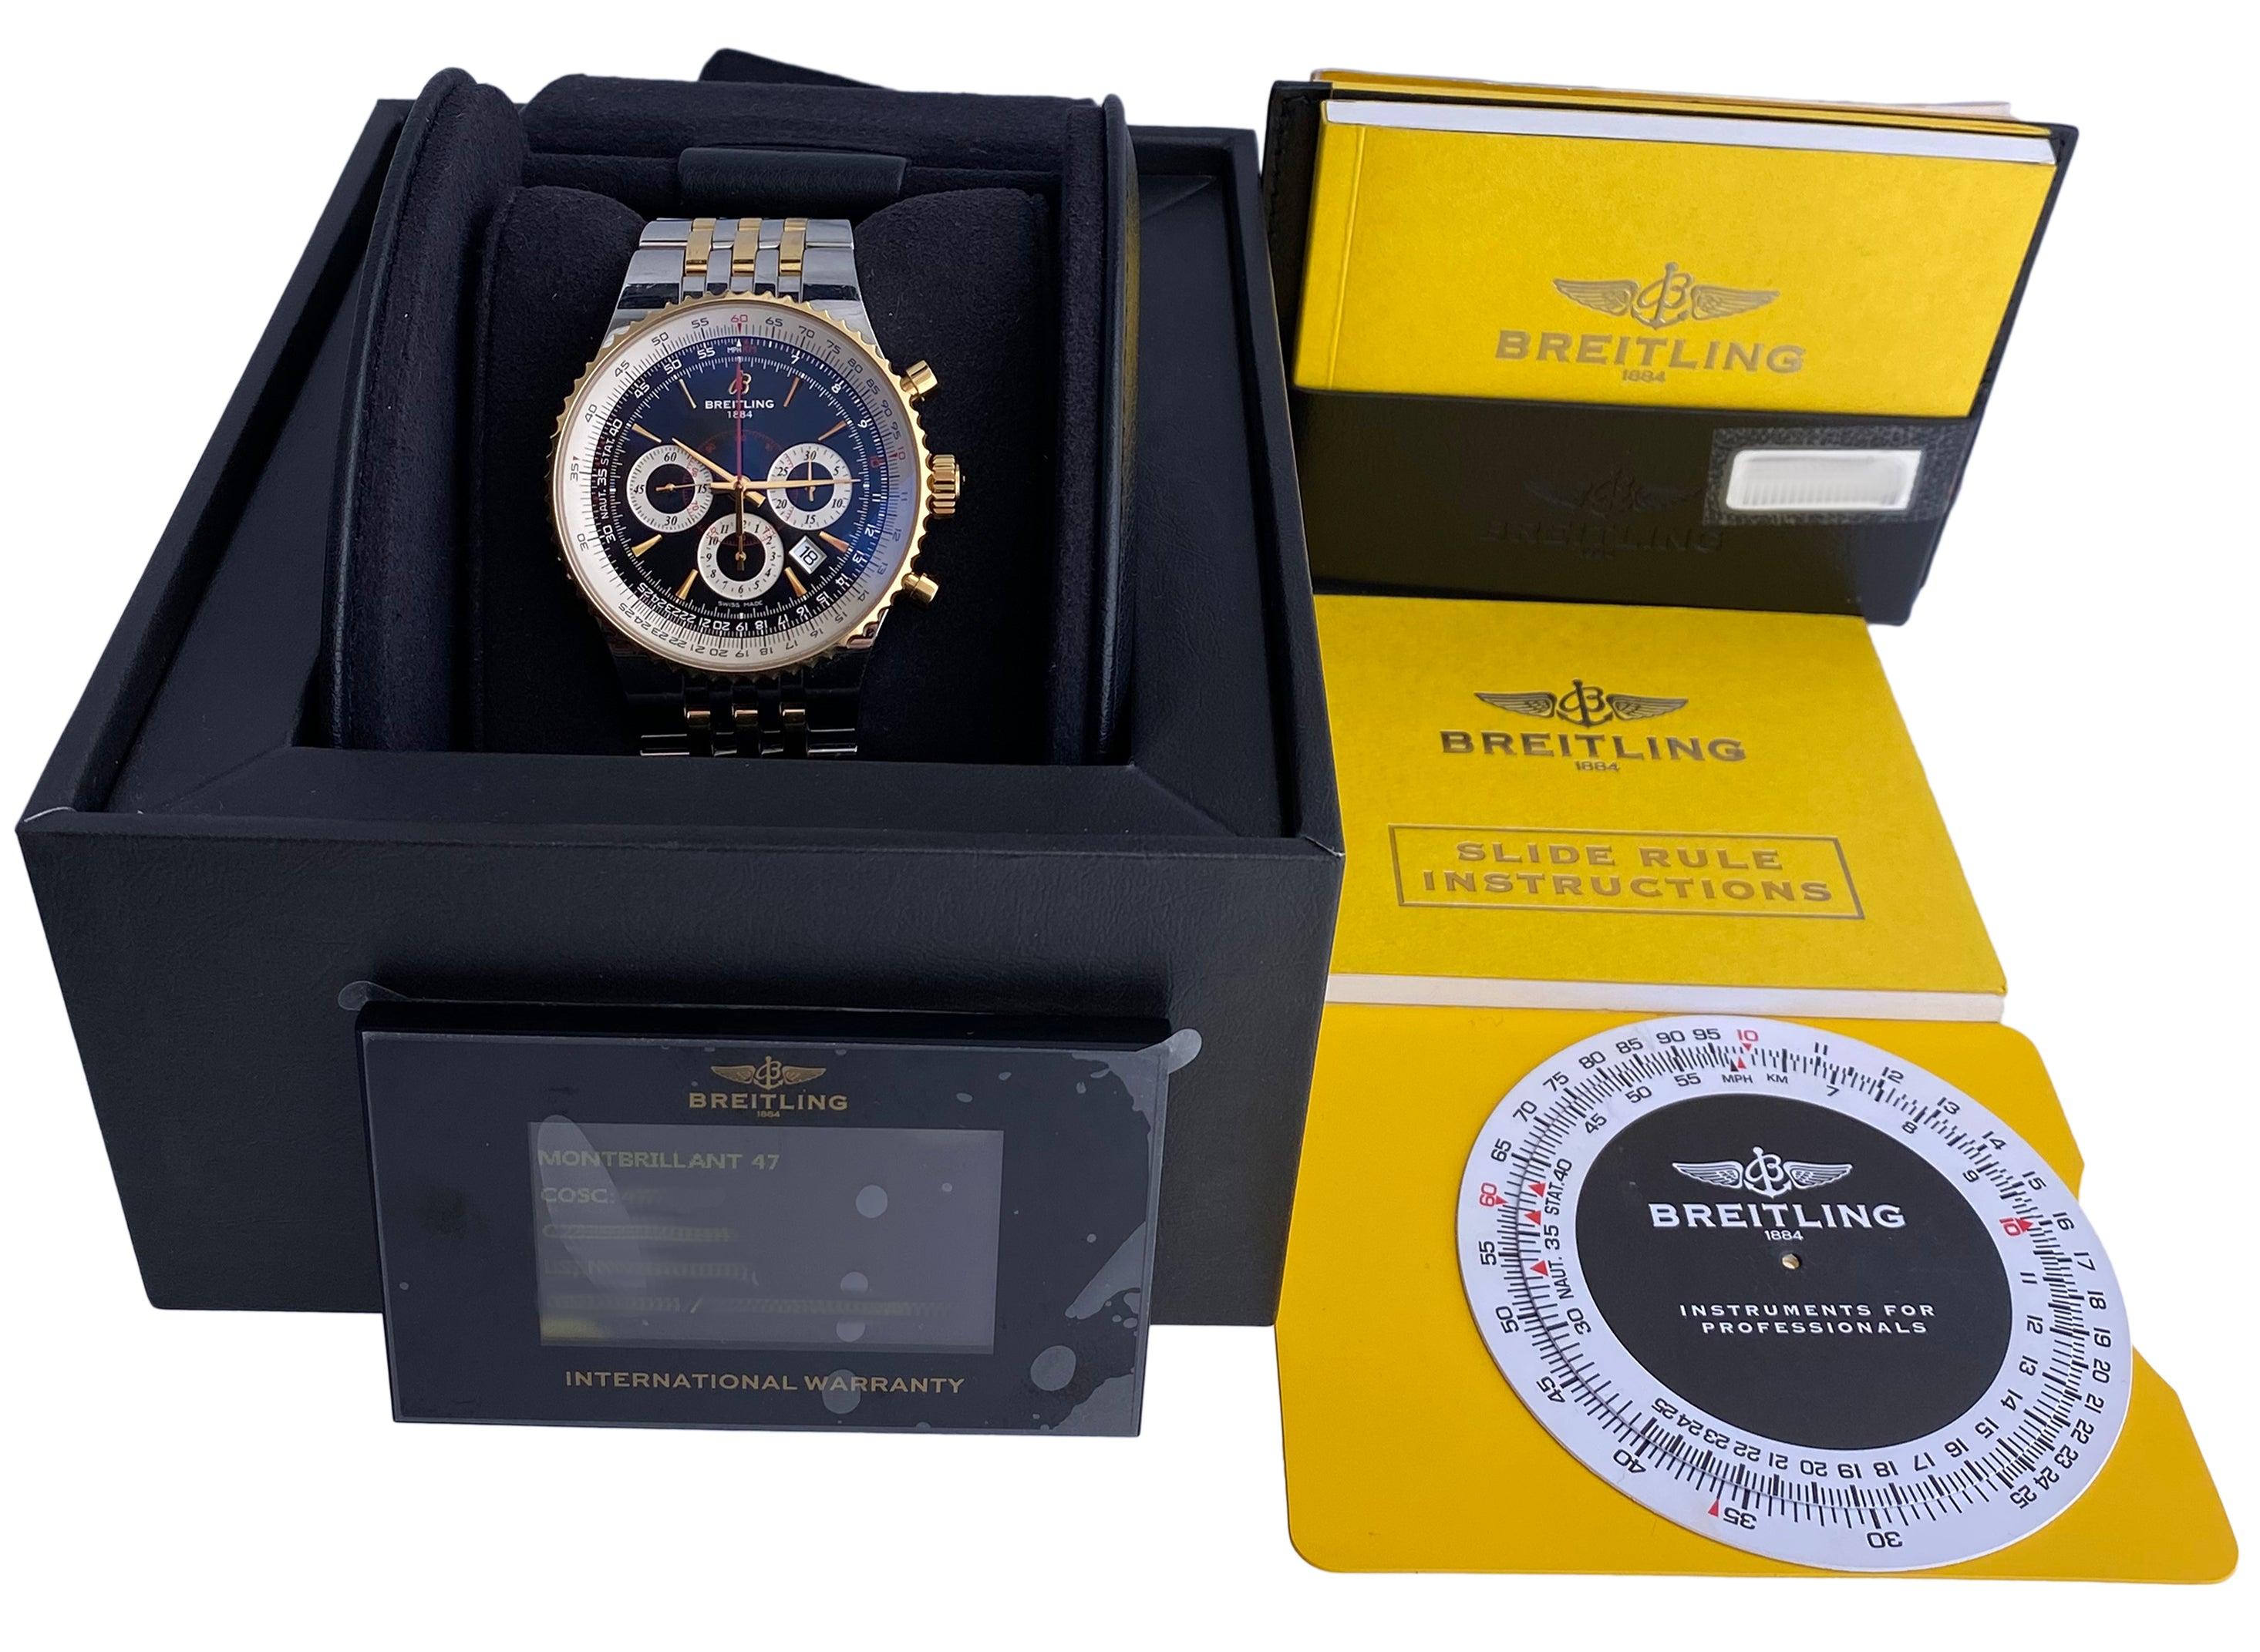 Breitling Montbrillant 47 Limited Edition Mens Watch. 47mm Stainless steel case with 18K yellow gold Bi-directional rotating bezel. Black dial with gold hands and index hour marker. Date display between 4 and 5 o'clock position. Three sub-dials.